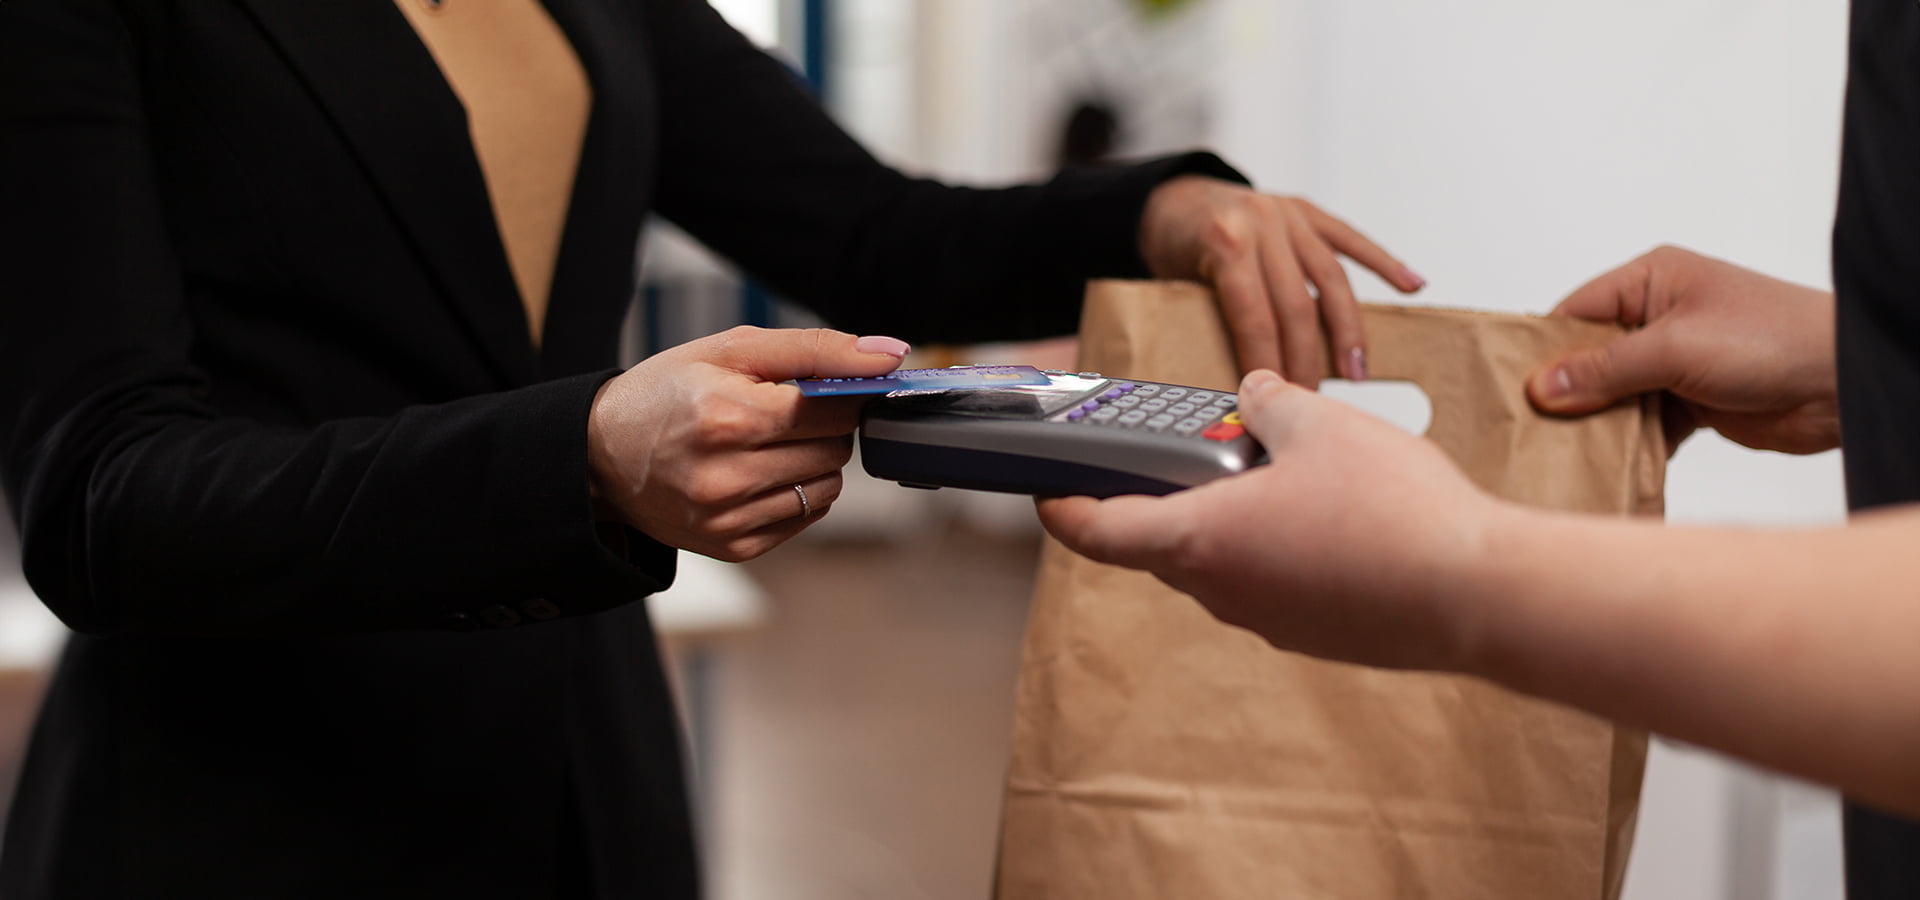 Credit Cards For Groceries